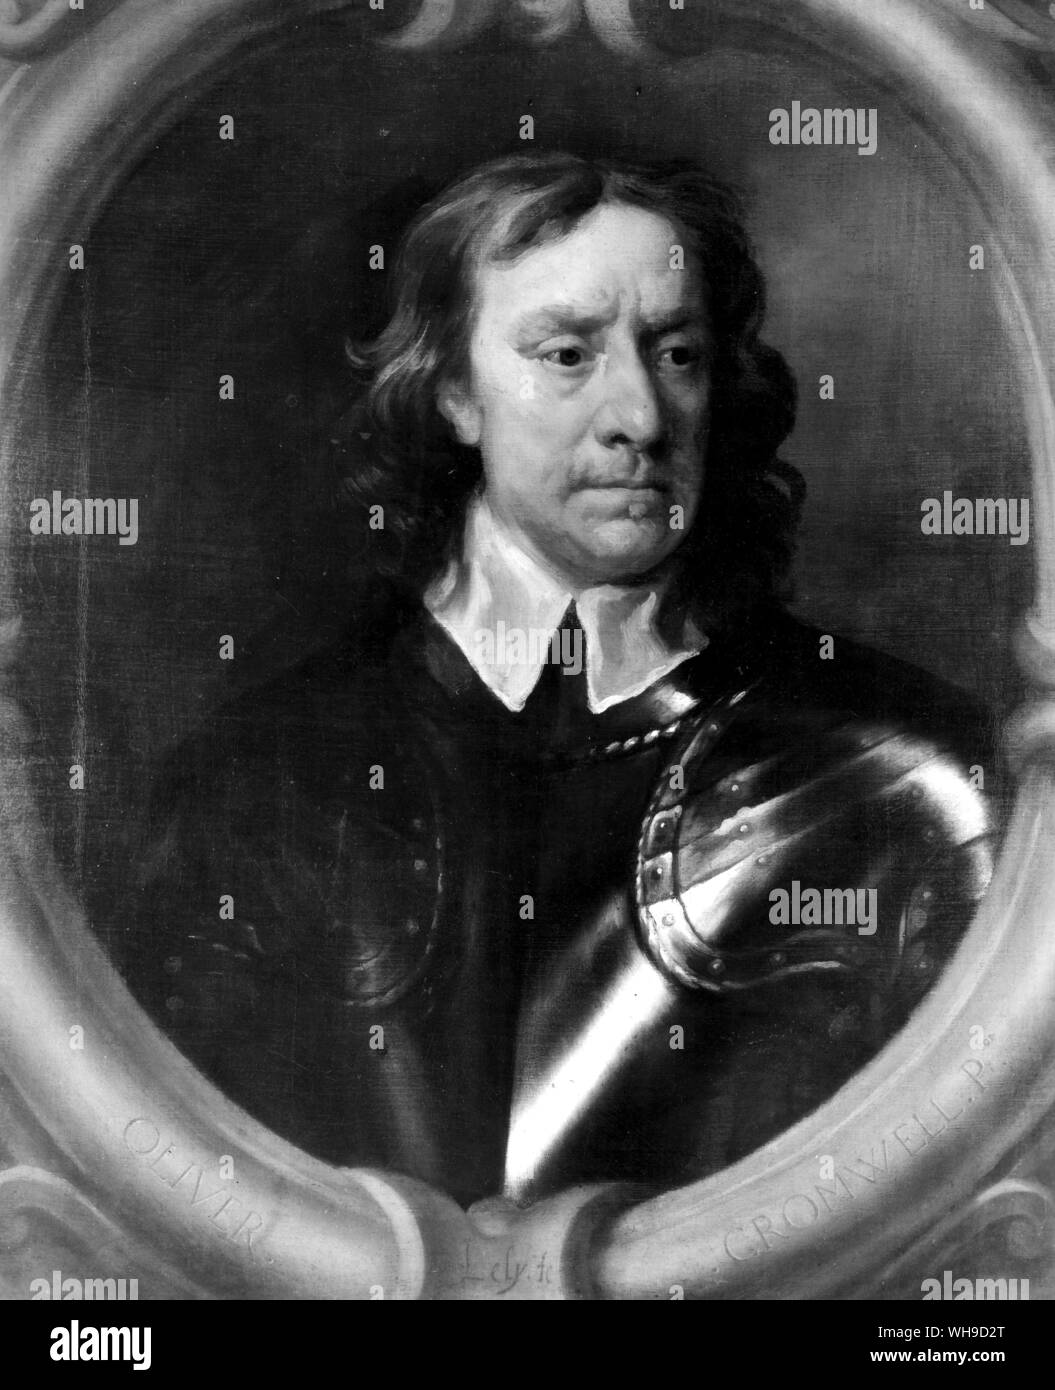 Sir Oliver Cromwell (1599-1658). English General and politician, Puritan leader of the Parliamentary side in the Civil War. Stock Photo